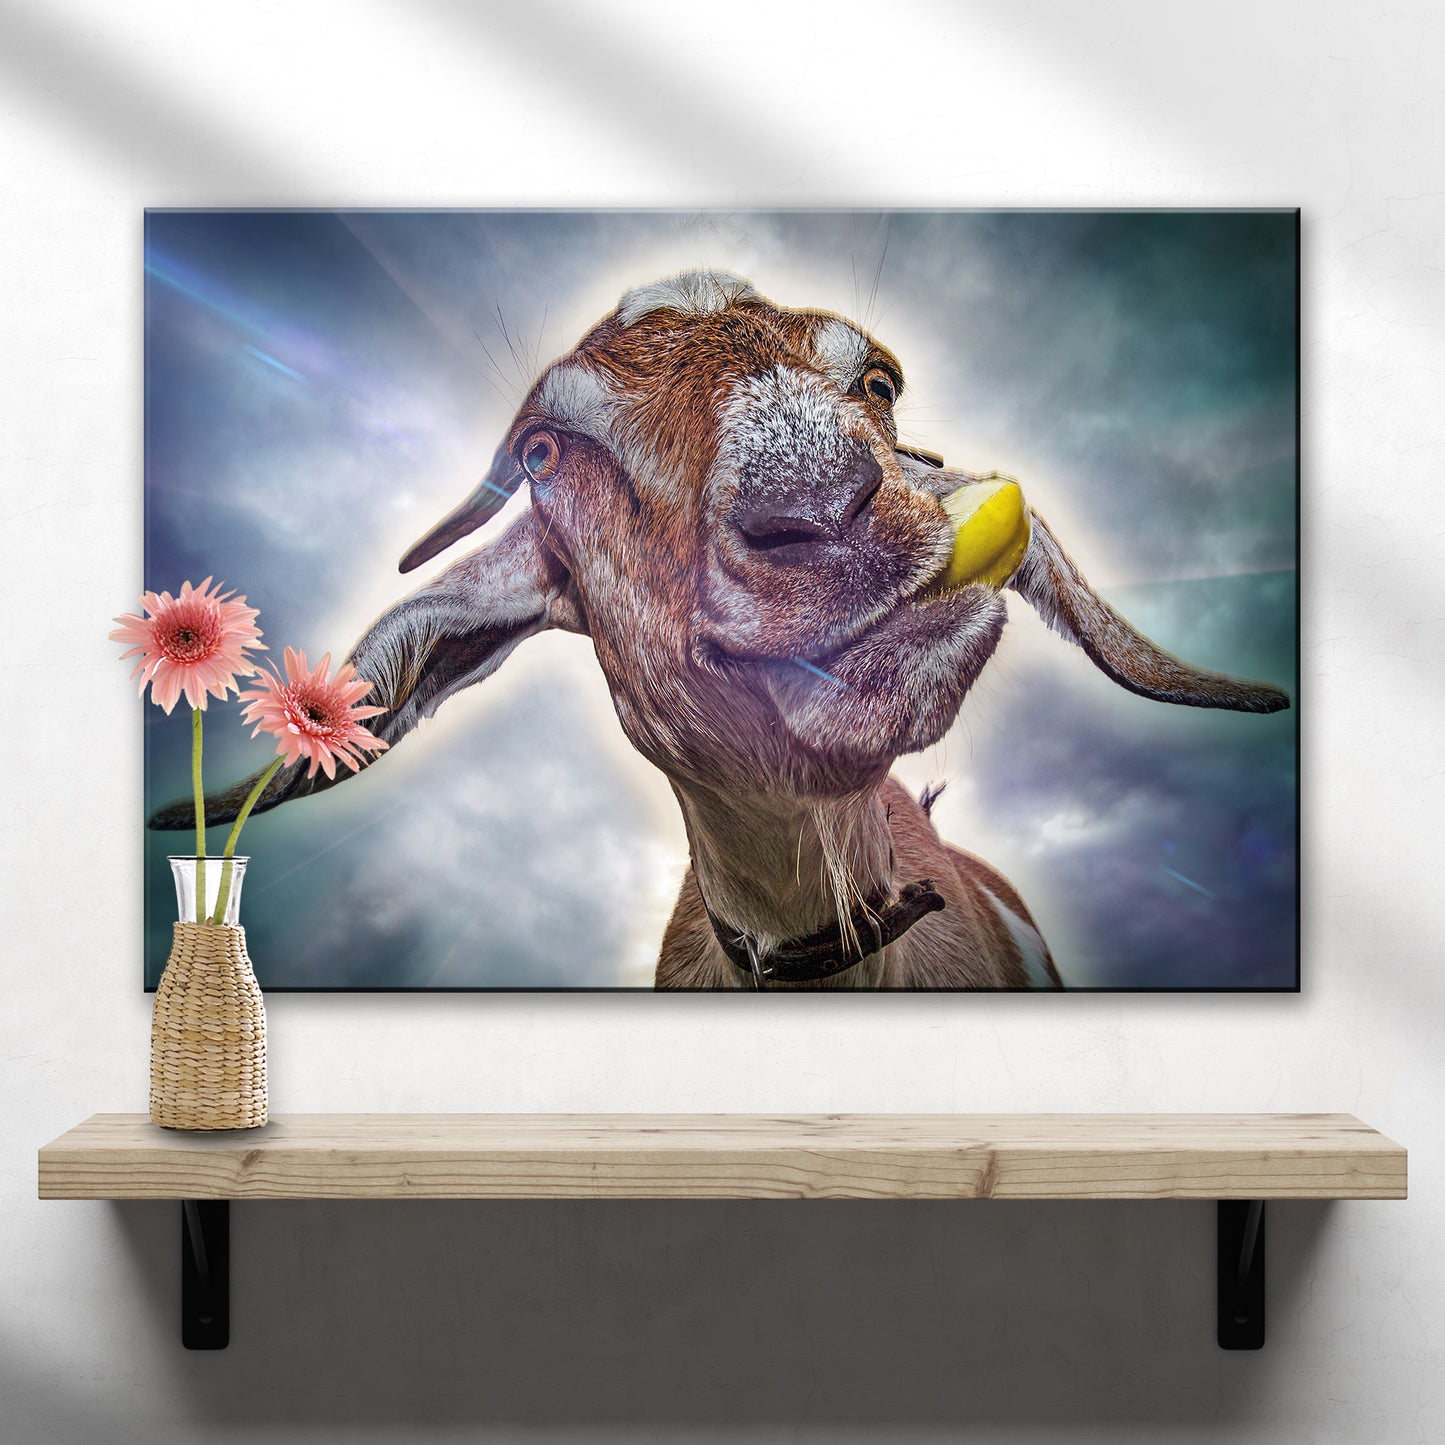 Wacky Nubian Goat Canvas Wall Art  - Image by Tailored Canvases